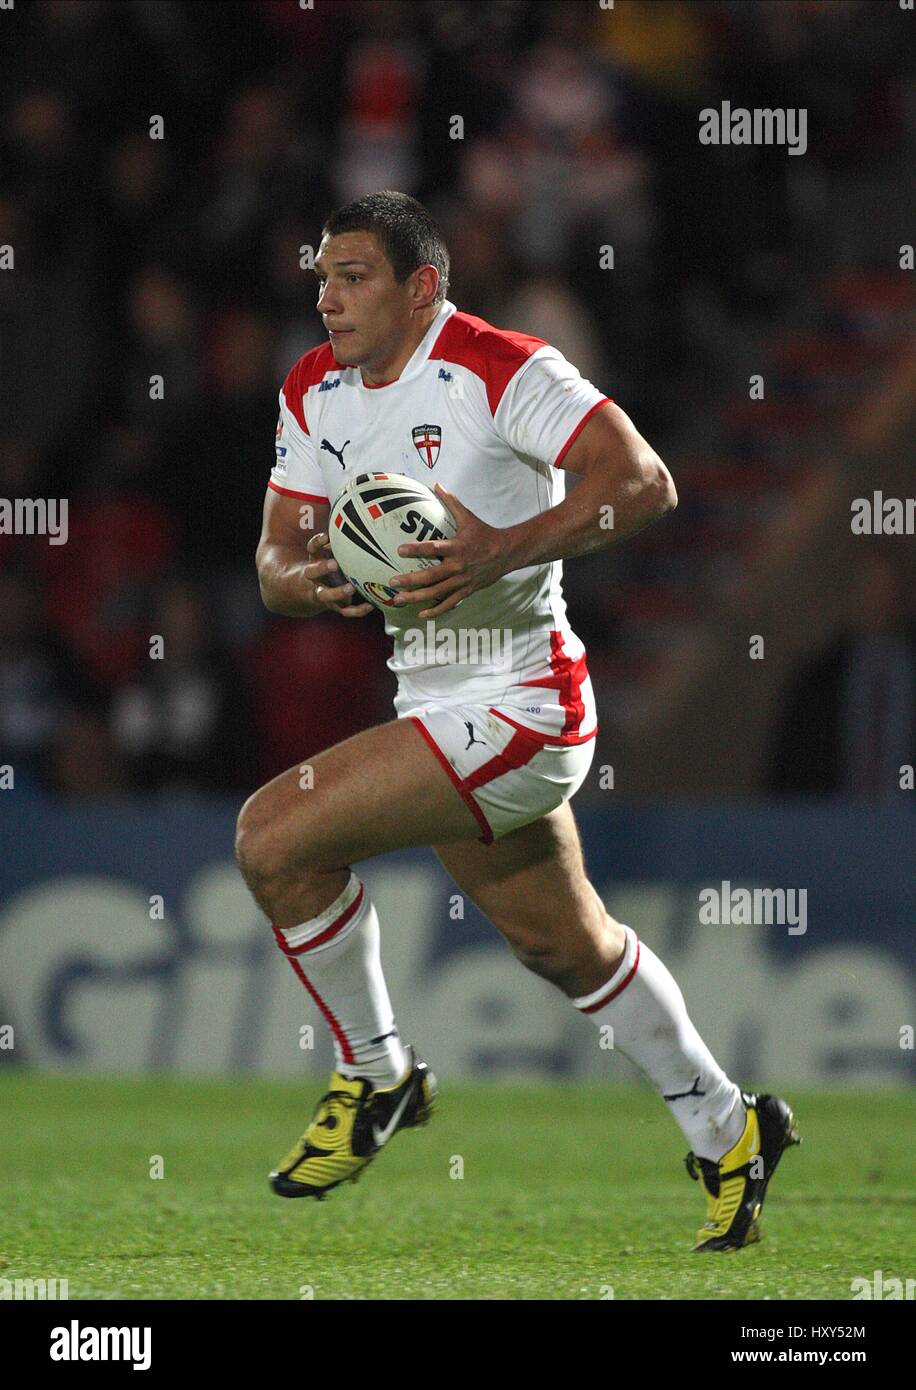 RYAN HALL ENGLAND RUGBY LEAGUE KEEPMOAT STADIUM DONCASTER ENGLAND 23 October 2009 Stock Photo